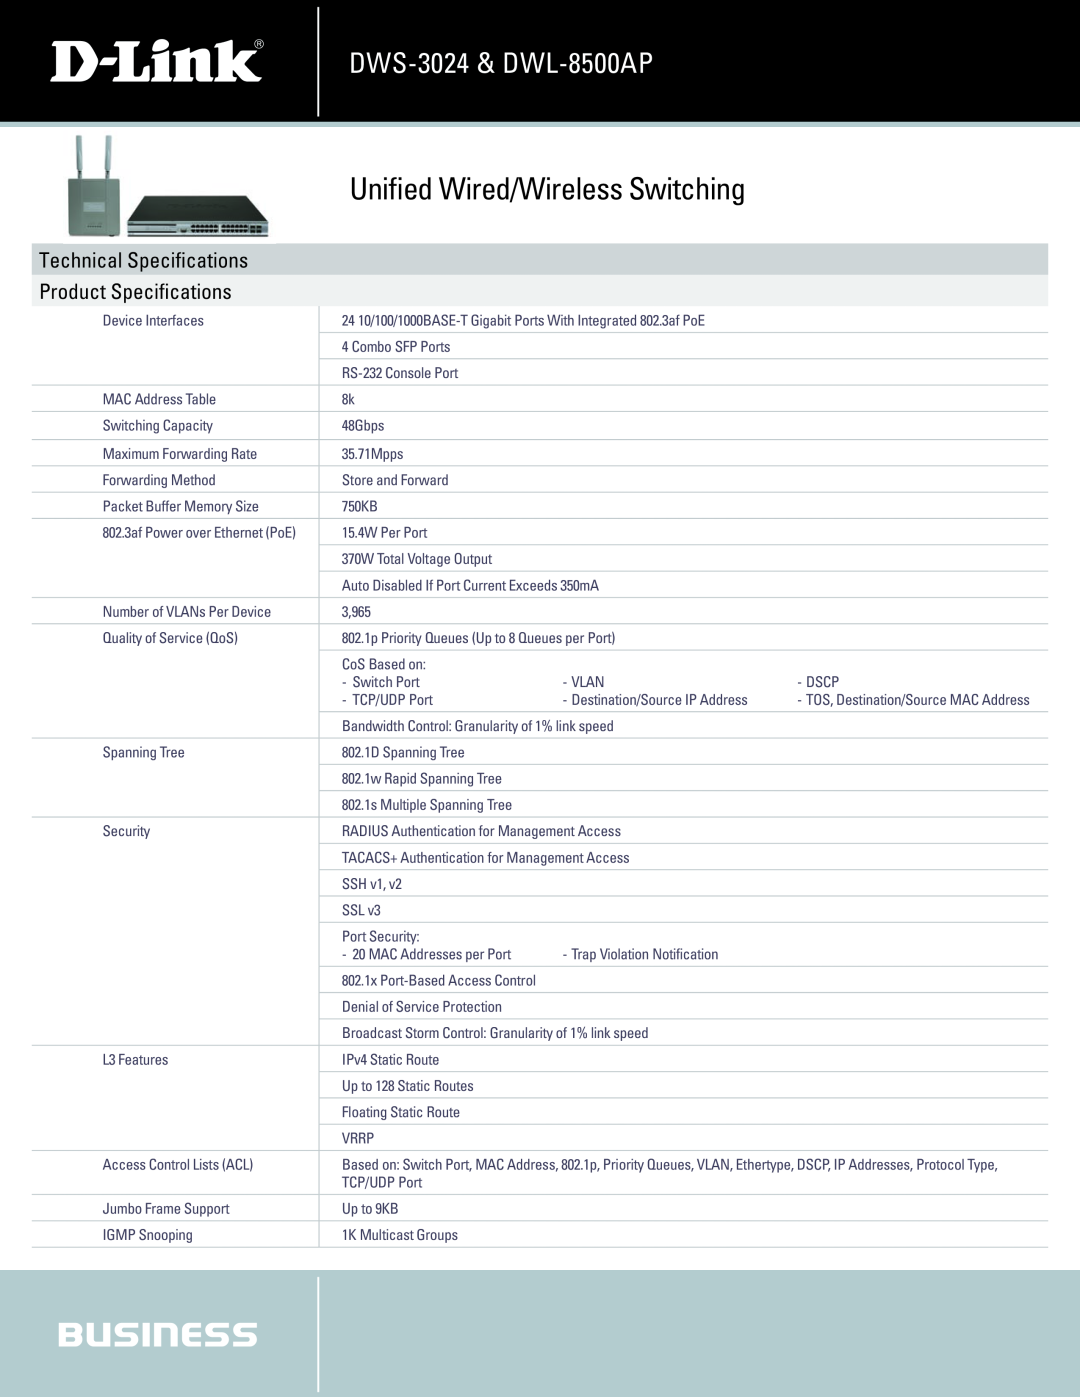 D-Link DWL-8500AP, DWS-3024 manual Unified Wired/Wireless Switching, Technical Specifications, Product Specifications 